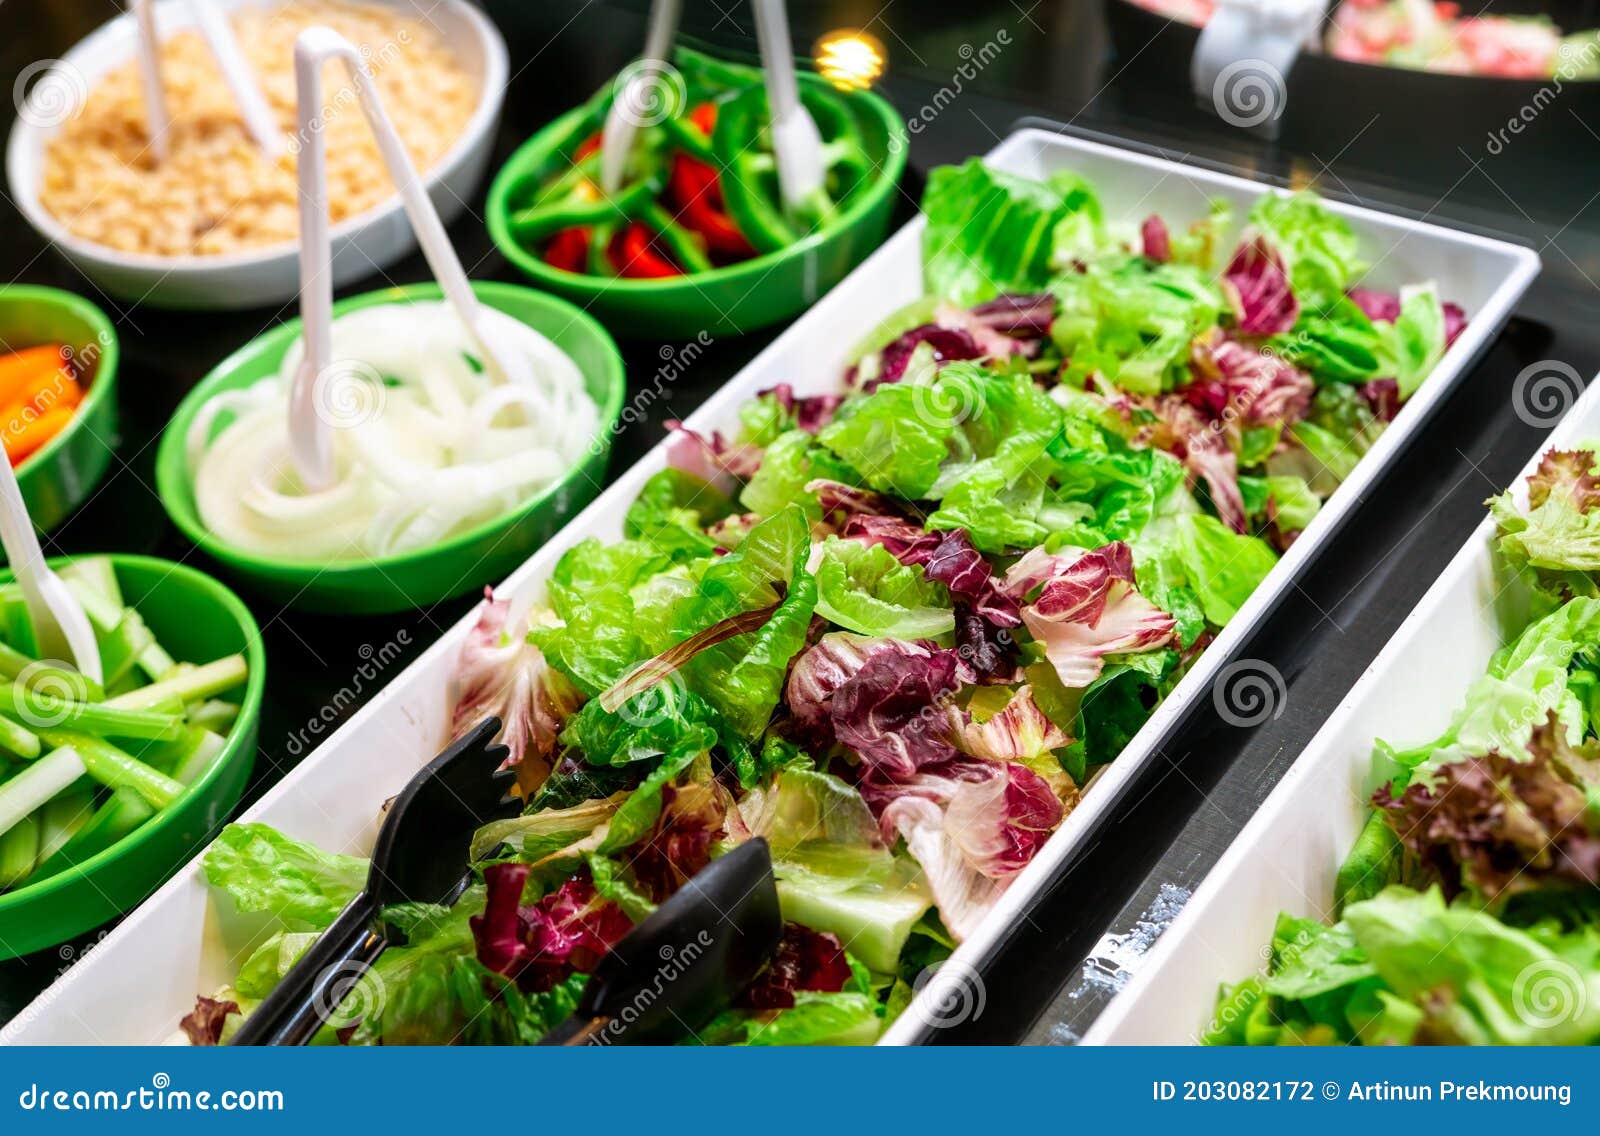 Salad Bar Buffet At Restaurant Fresh Salad Bar Buffet For Lunch Or Dinner Healthy Food Fresh Green And Purple Lettuce In White Stock Photo Image Of Delicious Counter 203082172